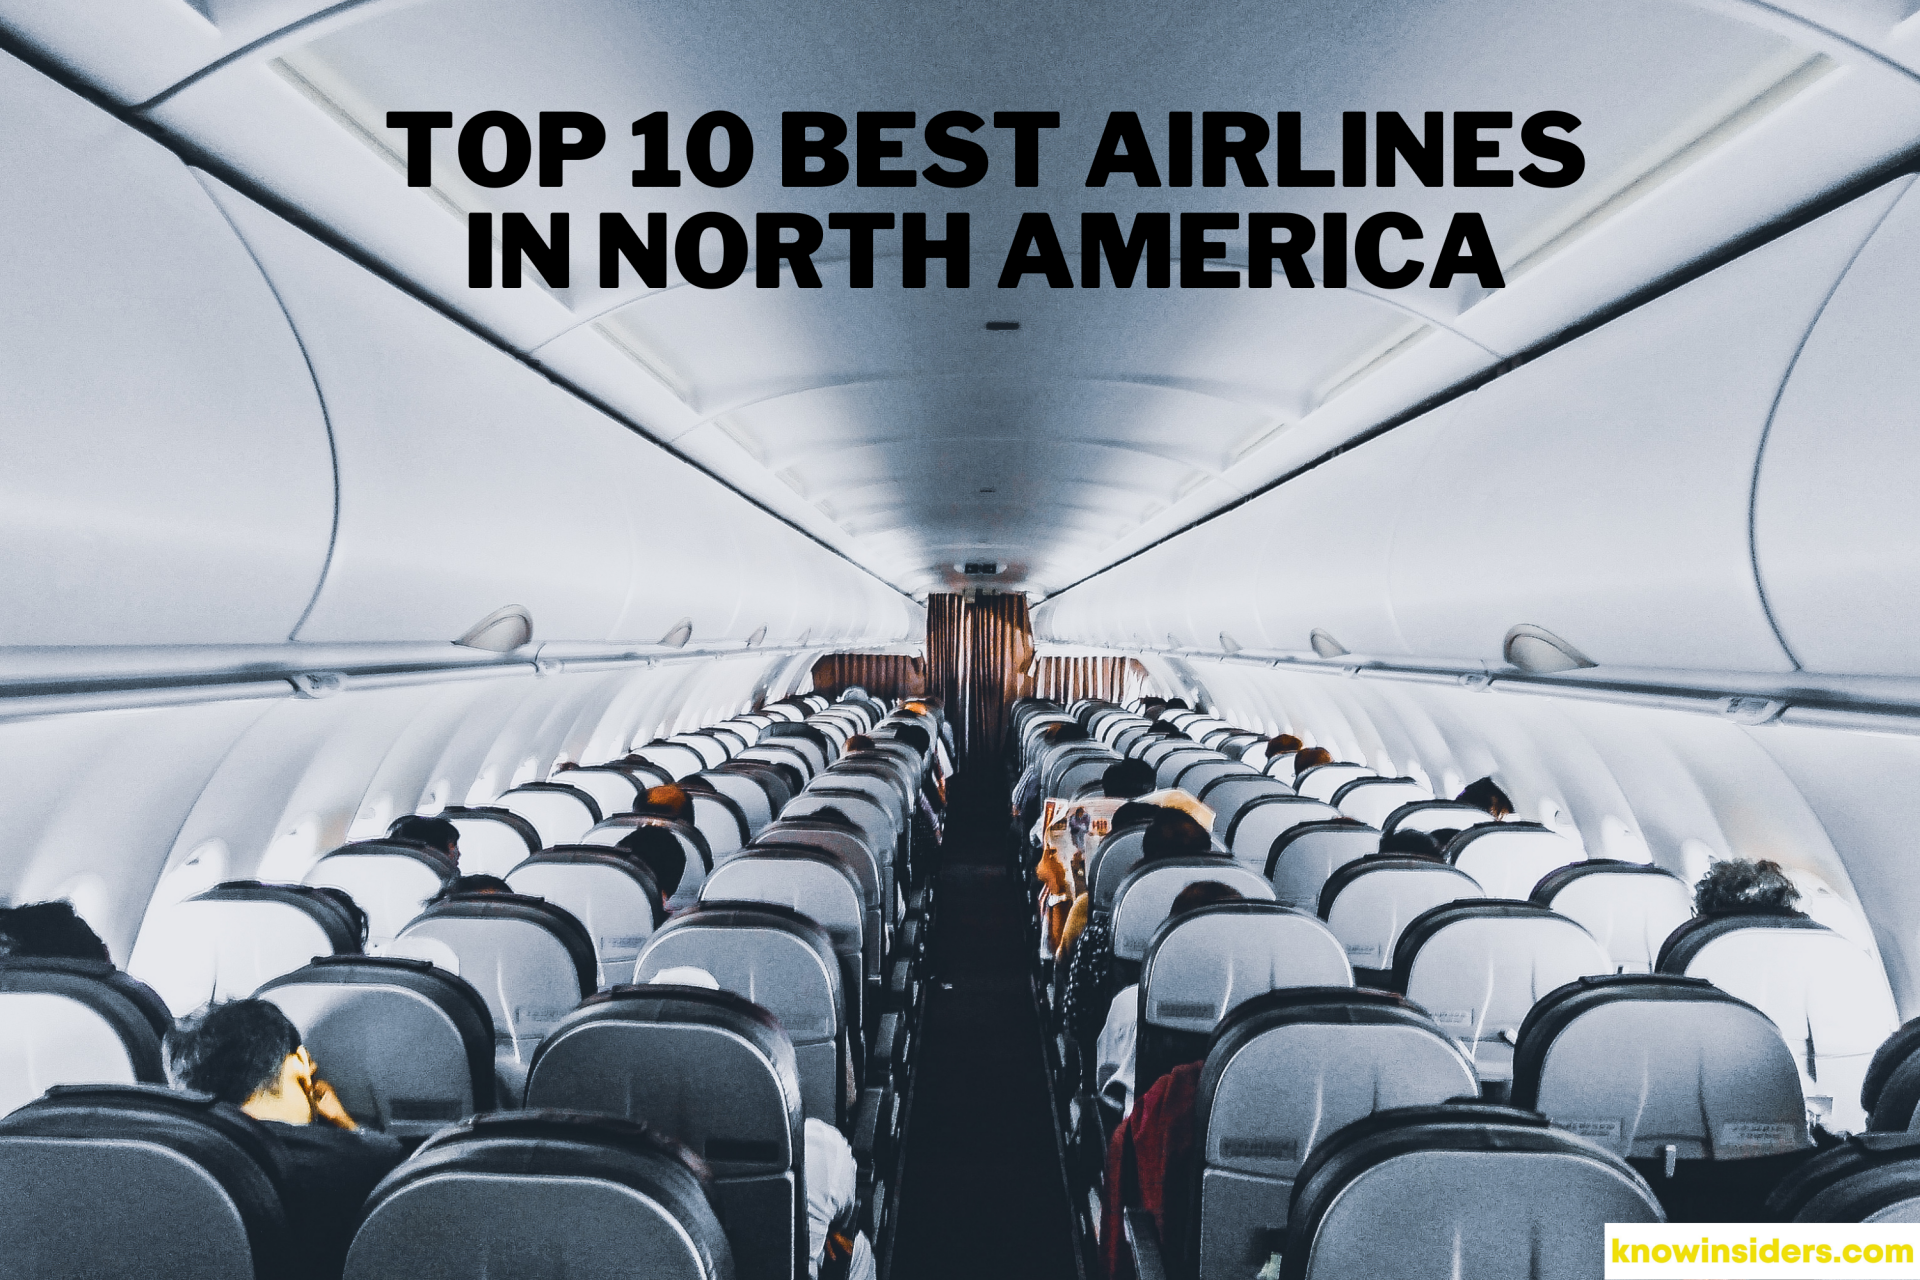 Top 10 Best Airlines In North America - Skytrax